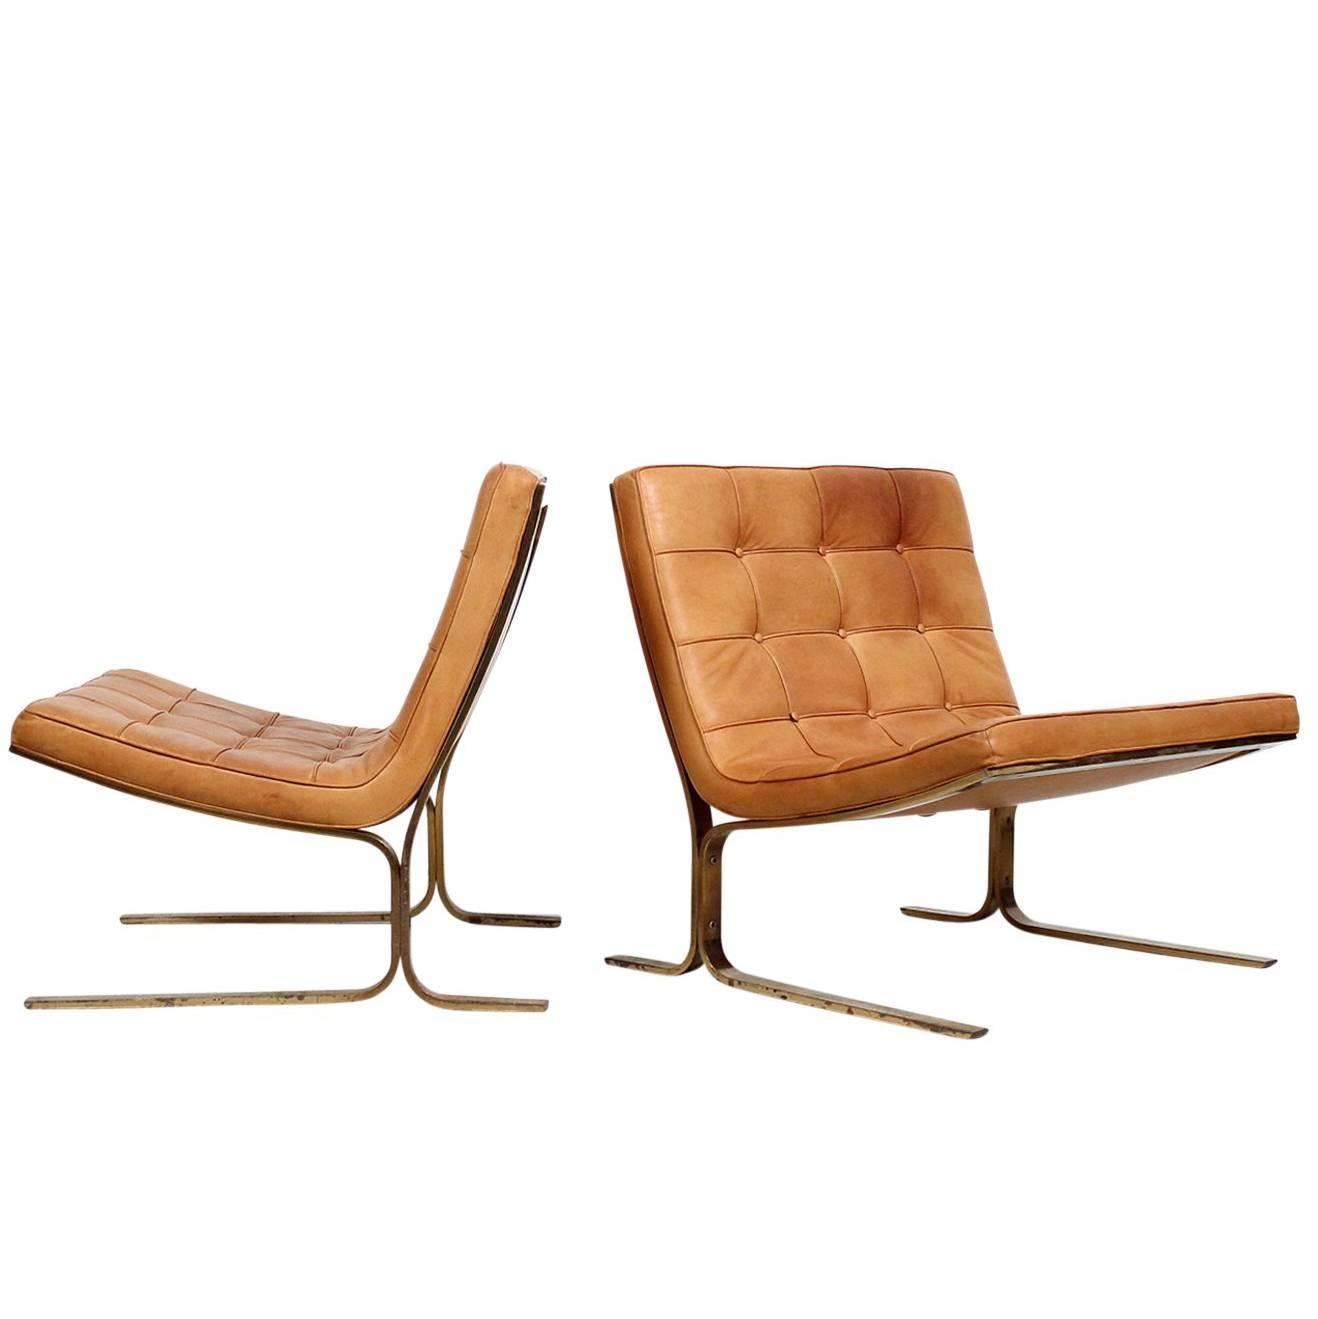 Pair of Leather Lounge Chairs by Nicos Zographos